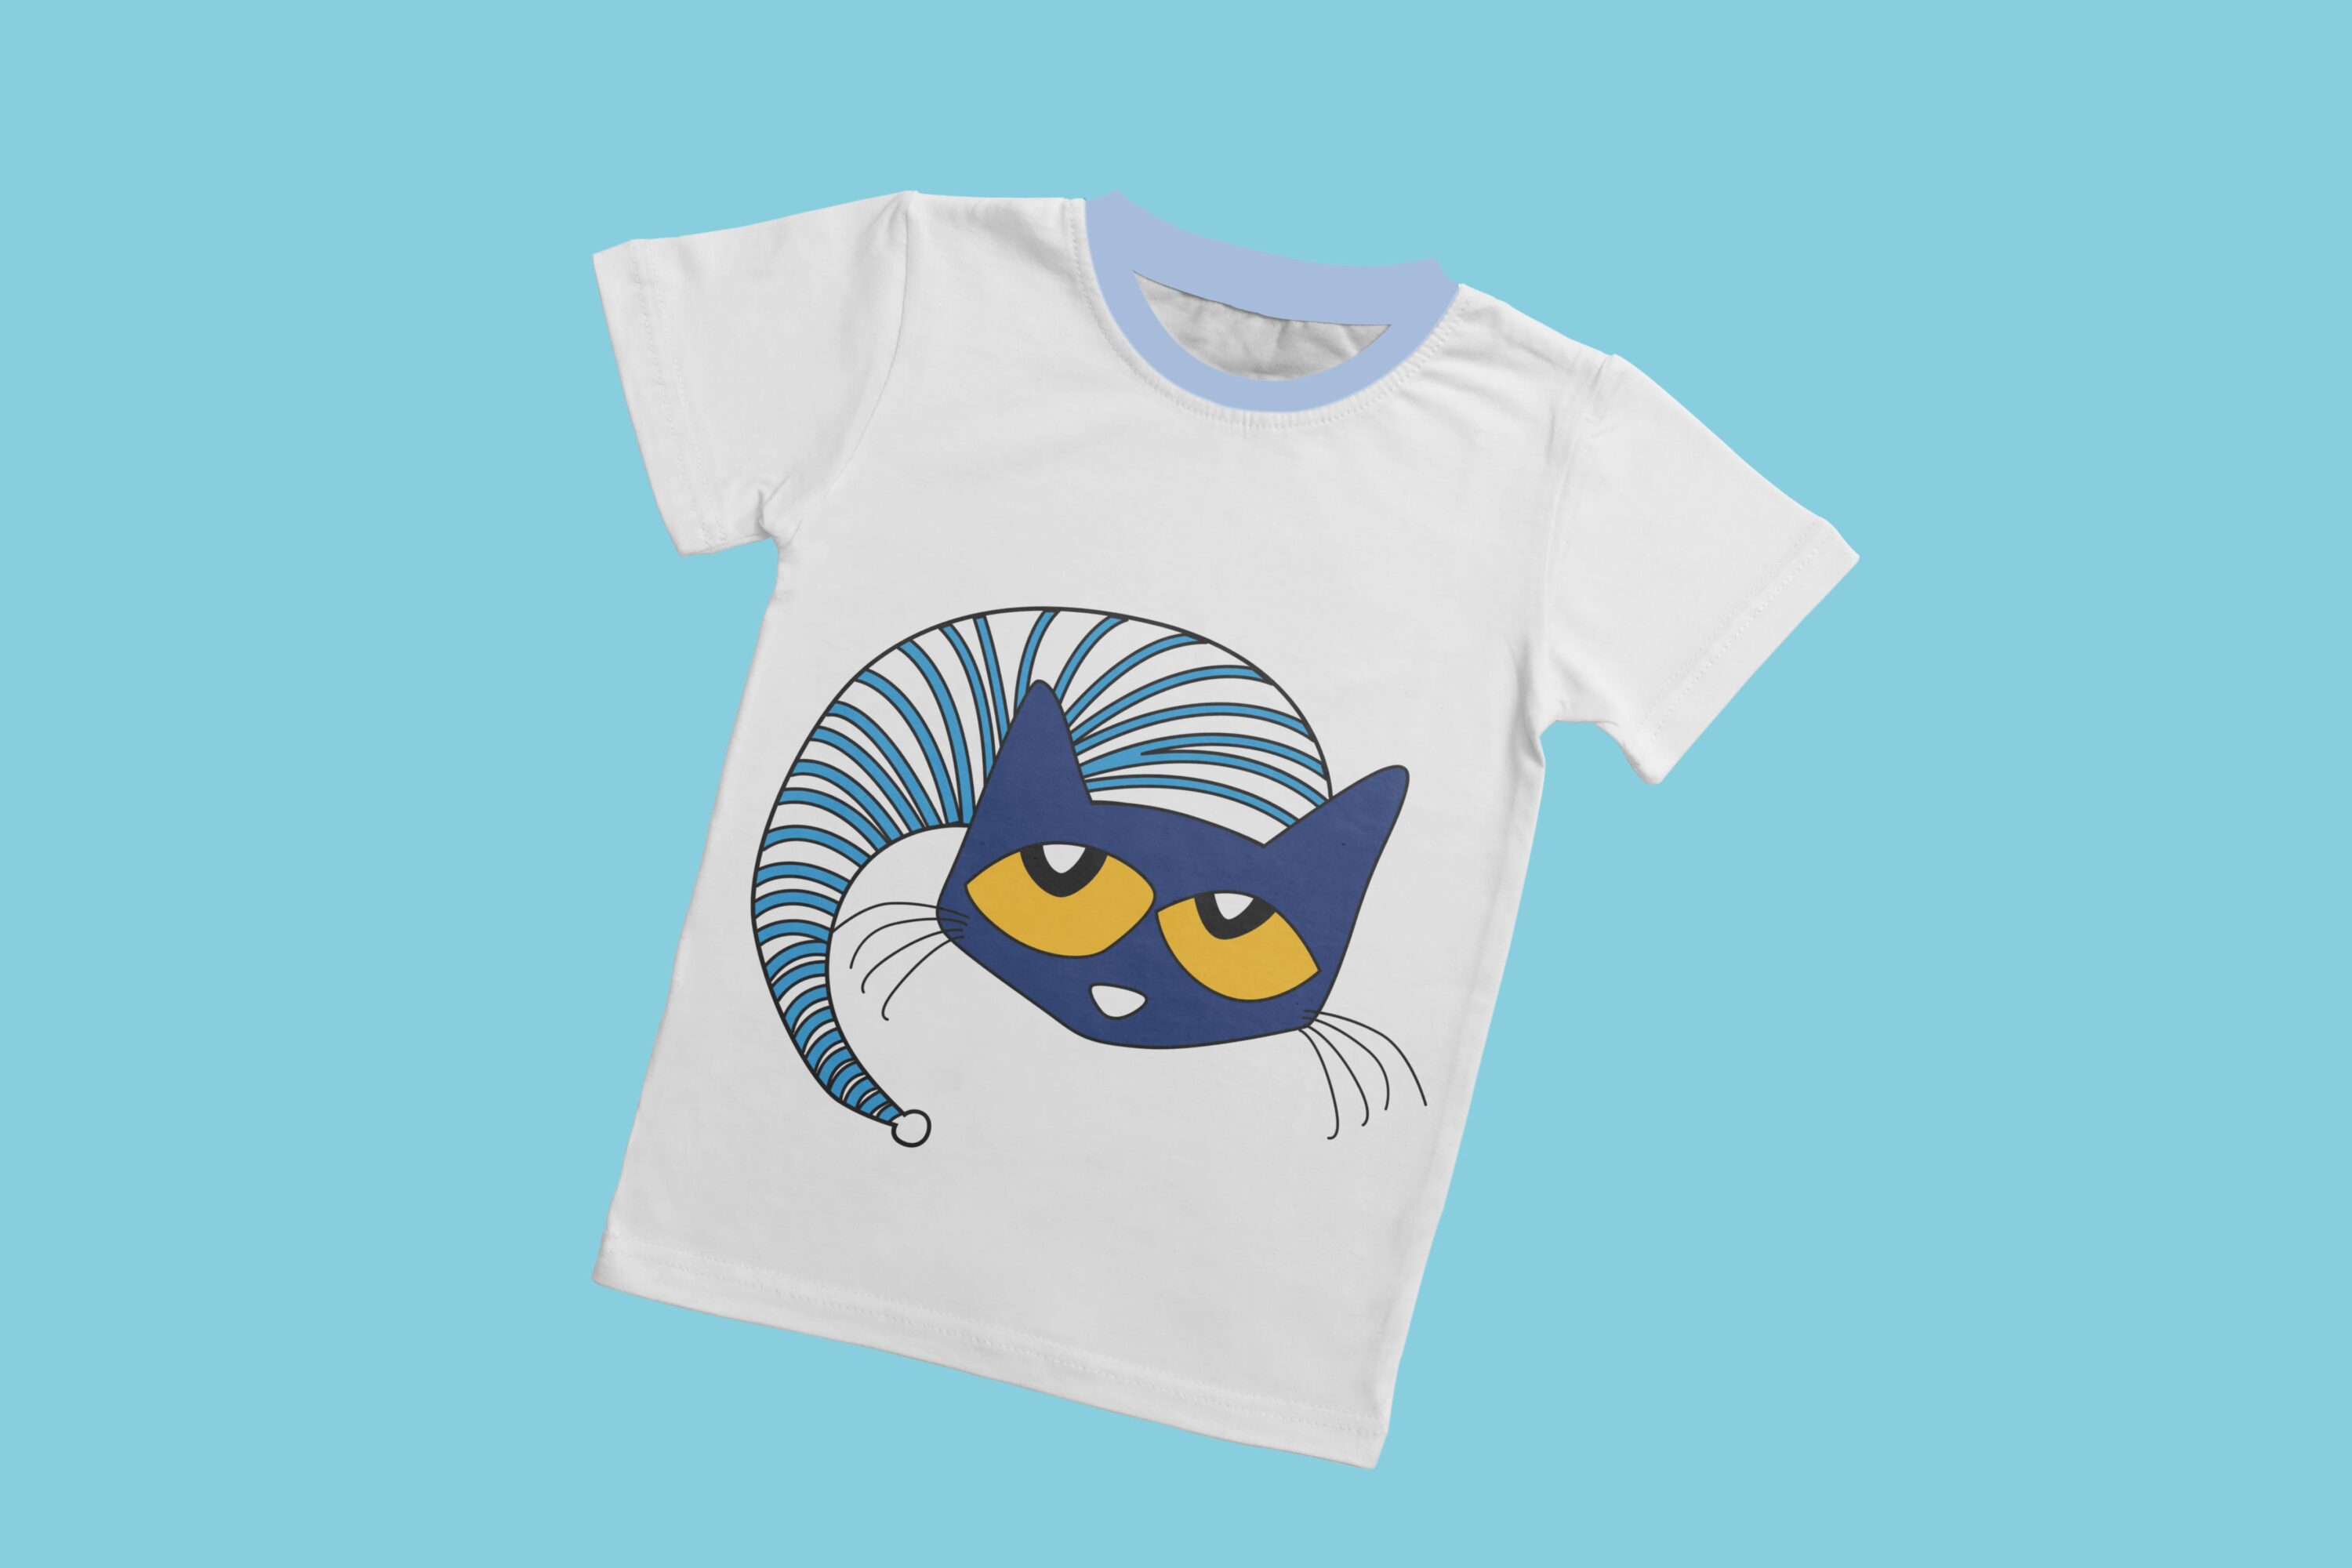 A white t-shirt with a light blue collar and the face of Pete the cat with yellow eyes and a blue and white cap.